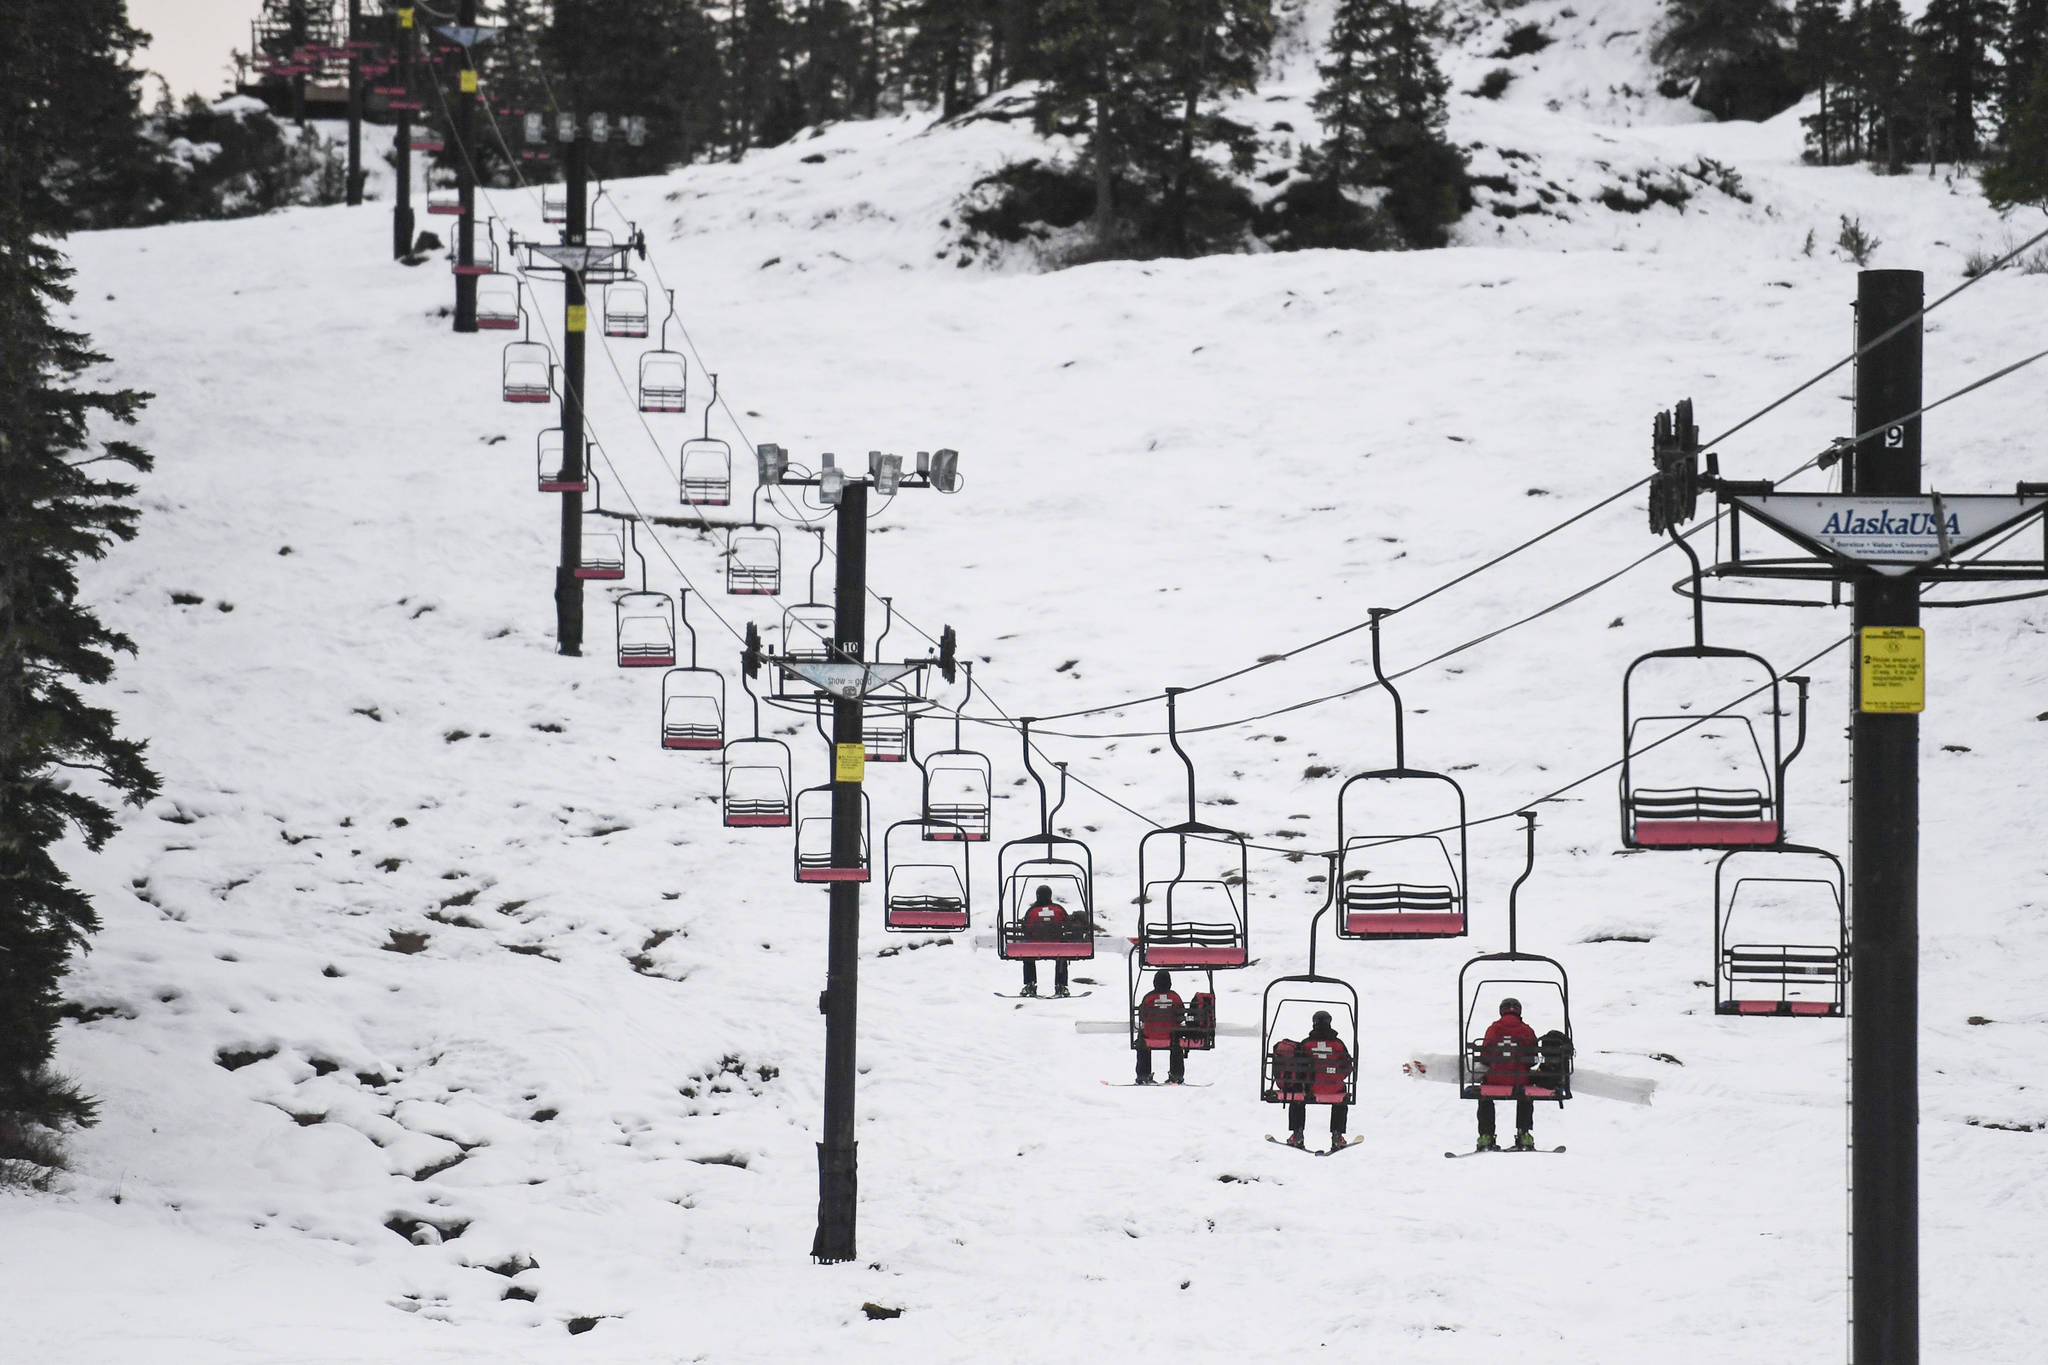 Ski patrollers ride the Hooter Chairlift as they work at Eaglecrest Ski Area on Thursday, Dec. 12, 2019. (Michael Penn | Juneau Empire)